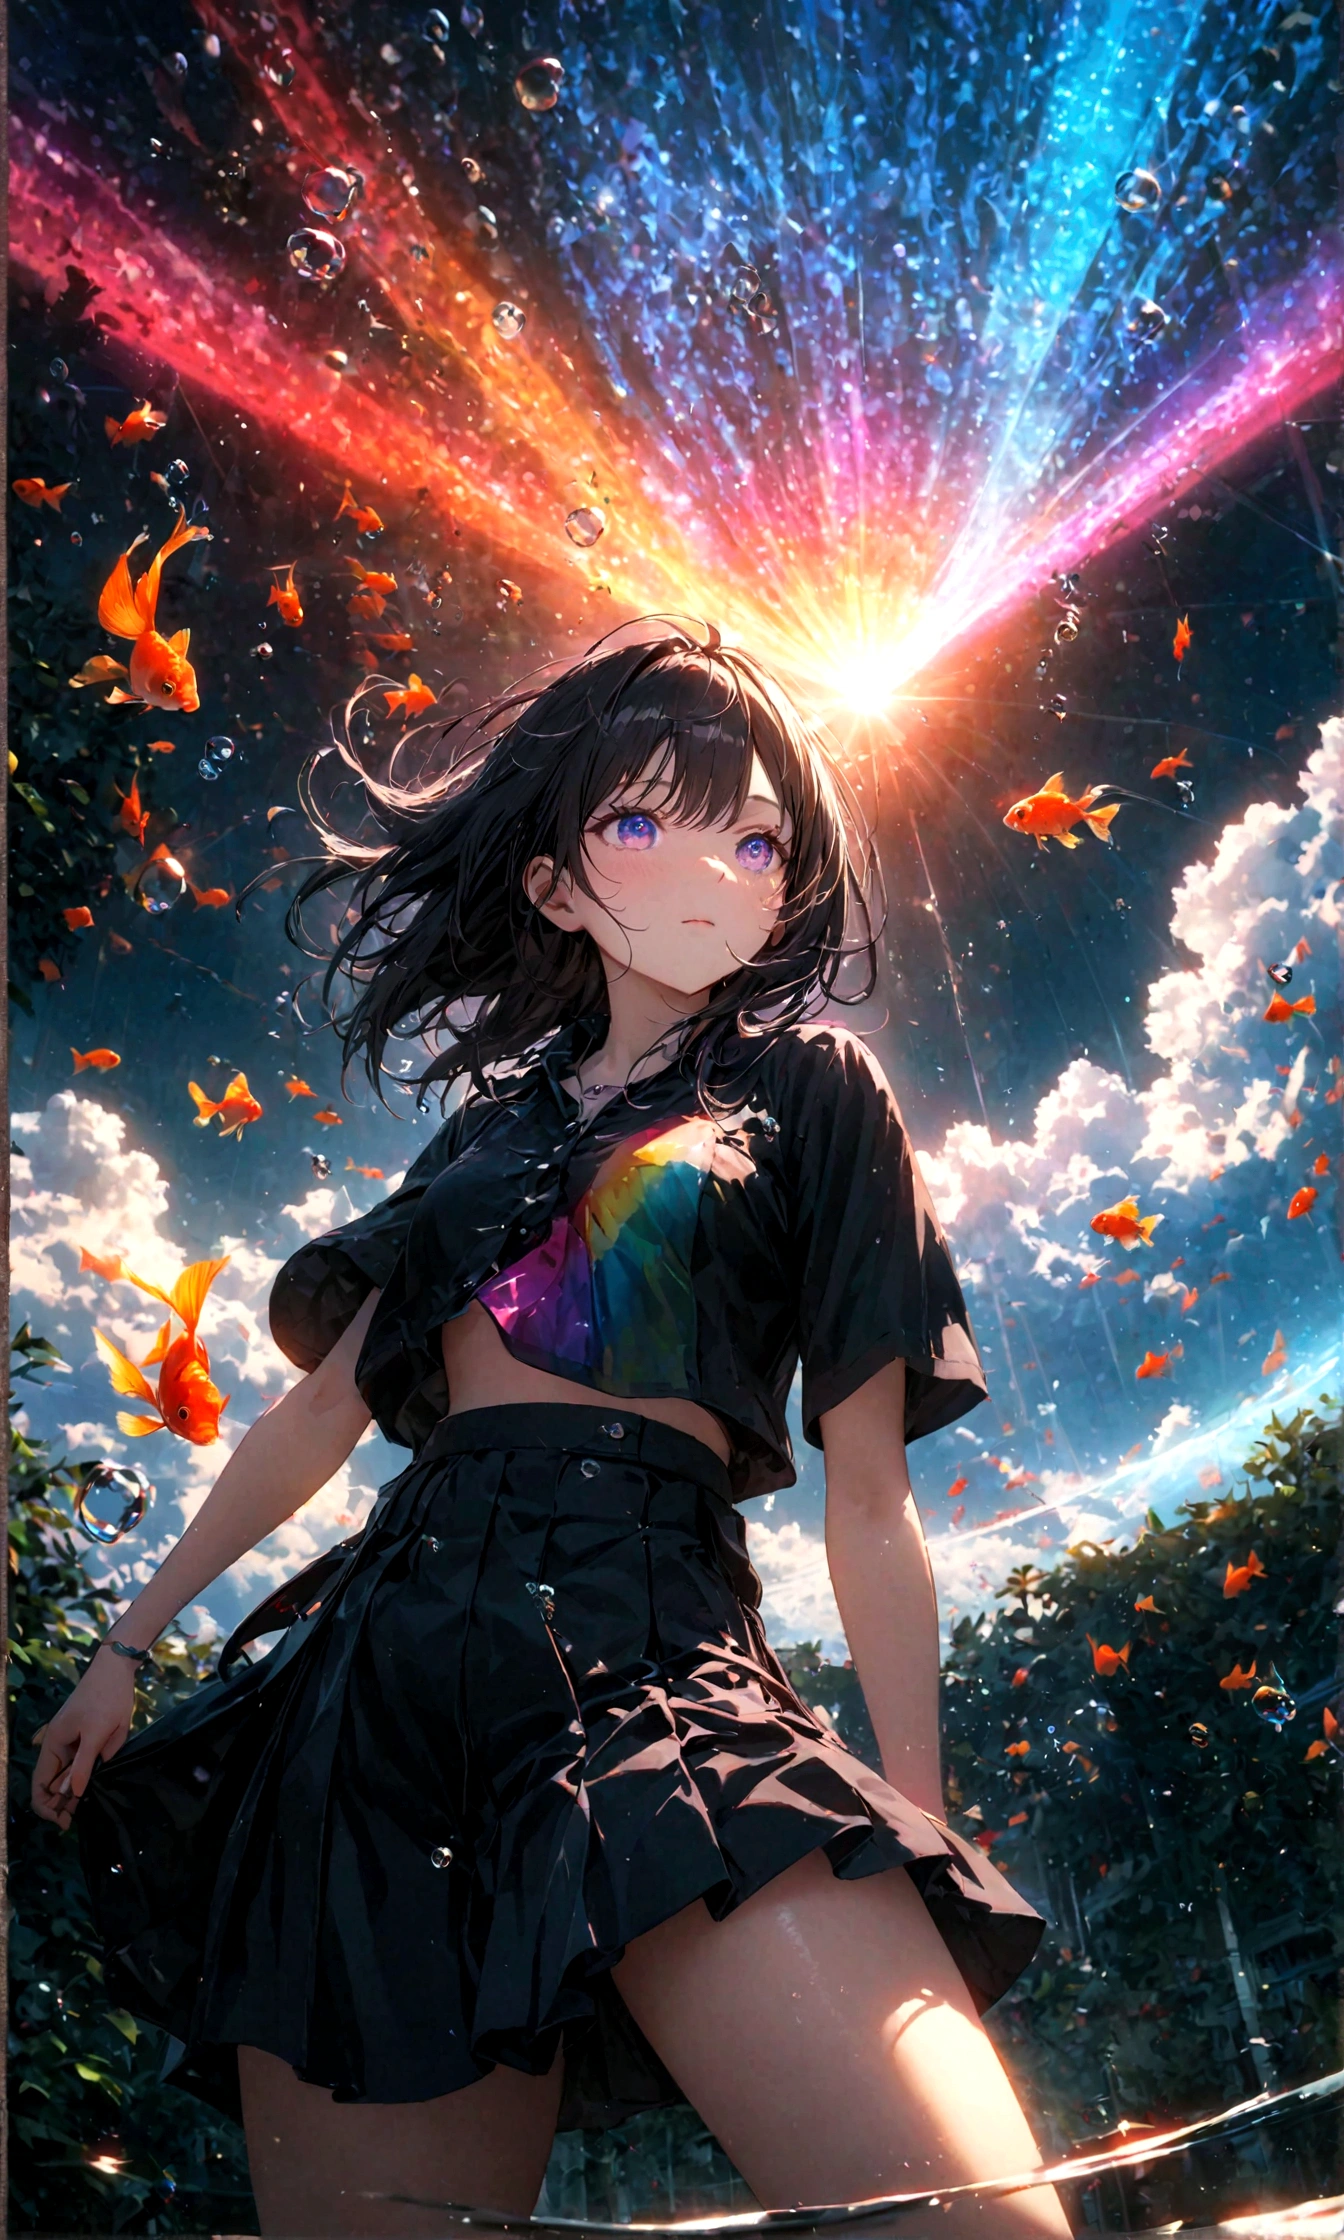 (female\(student, age of 15, JK, short silver floating hair, cosmic colored eyes, black color uniform of school, pale skin, tired face with no shine in the eyes\) is looking up at the sky), (so many goldfish are swimming in the air), beautiful sky, beautiful clouds, summery colorful flowers are blooming here and there, (crystal clear bubbles are shining prism here and there in the sky), there is the noonday moon and noonday stars in the sky, female is at messy downtown, BREAK ,quality\(8k,wallpaper of extremely detailed CG unit, ​masterpiece,hight resolution,top-quality,top-quality real texture skin,hyper realisitic,increase the resolution,RAW photos,best qualtiy,highly detailed,the wallpaper,cinematic lighting,ray trace,golden ratio\),(long shot),wide shot,